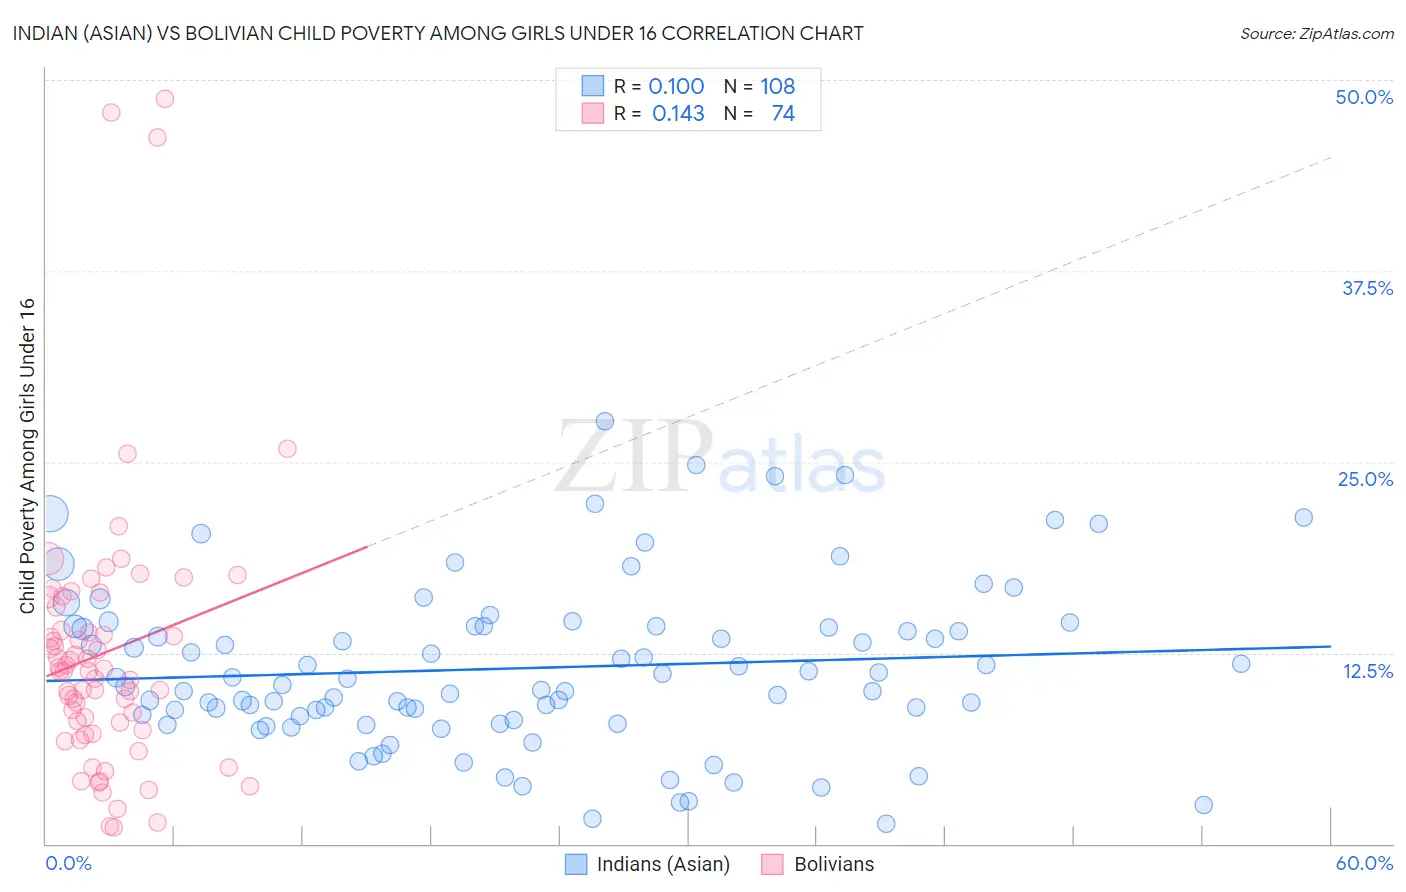 Indian (Asian) vs Bolivian Child Poverty Among Girls Under 16